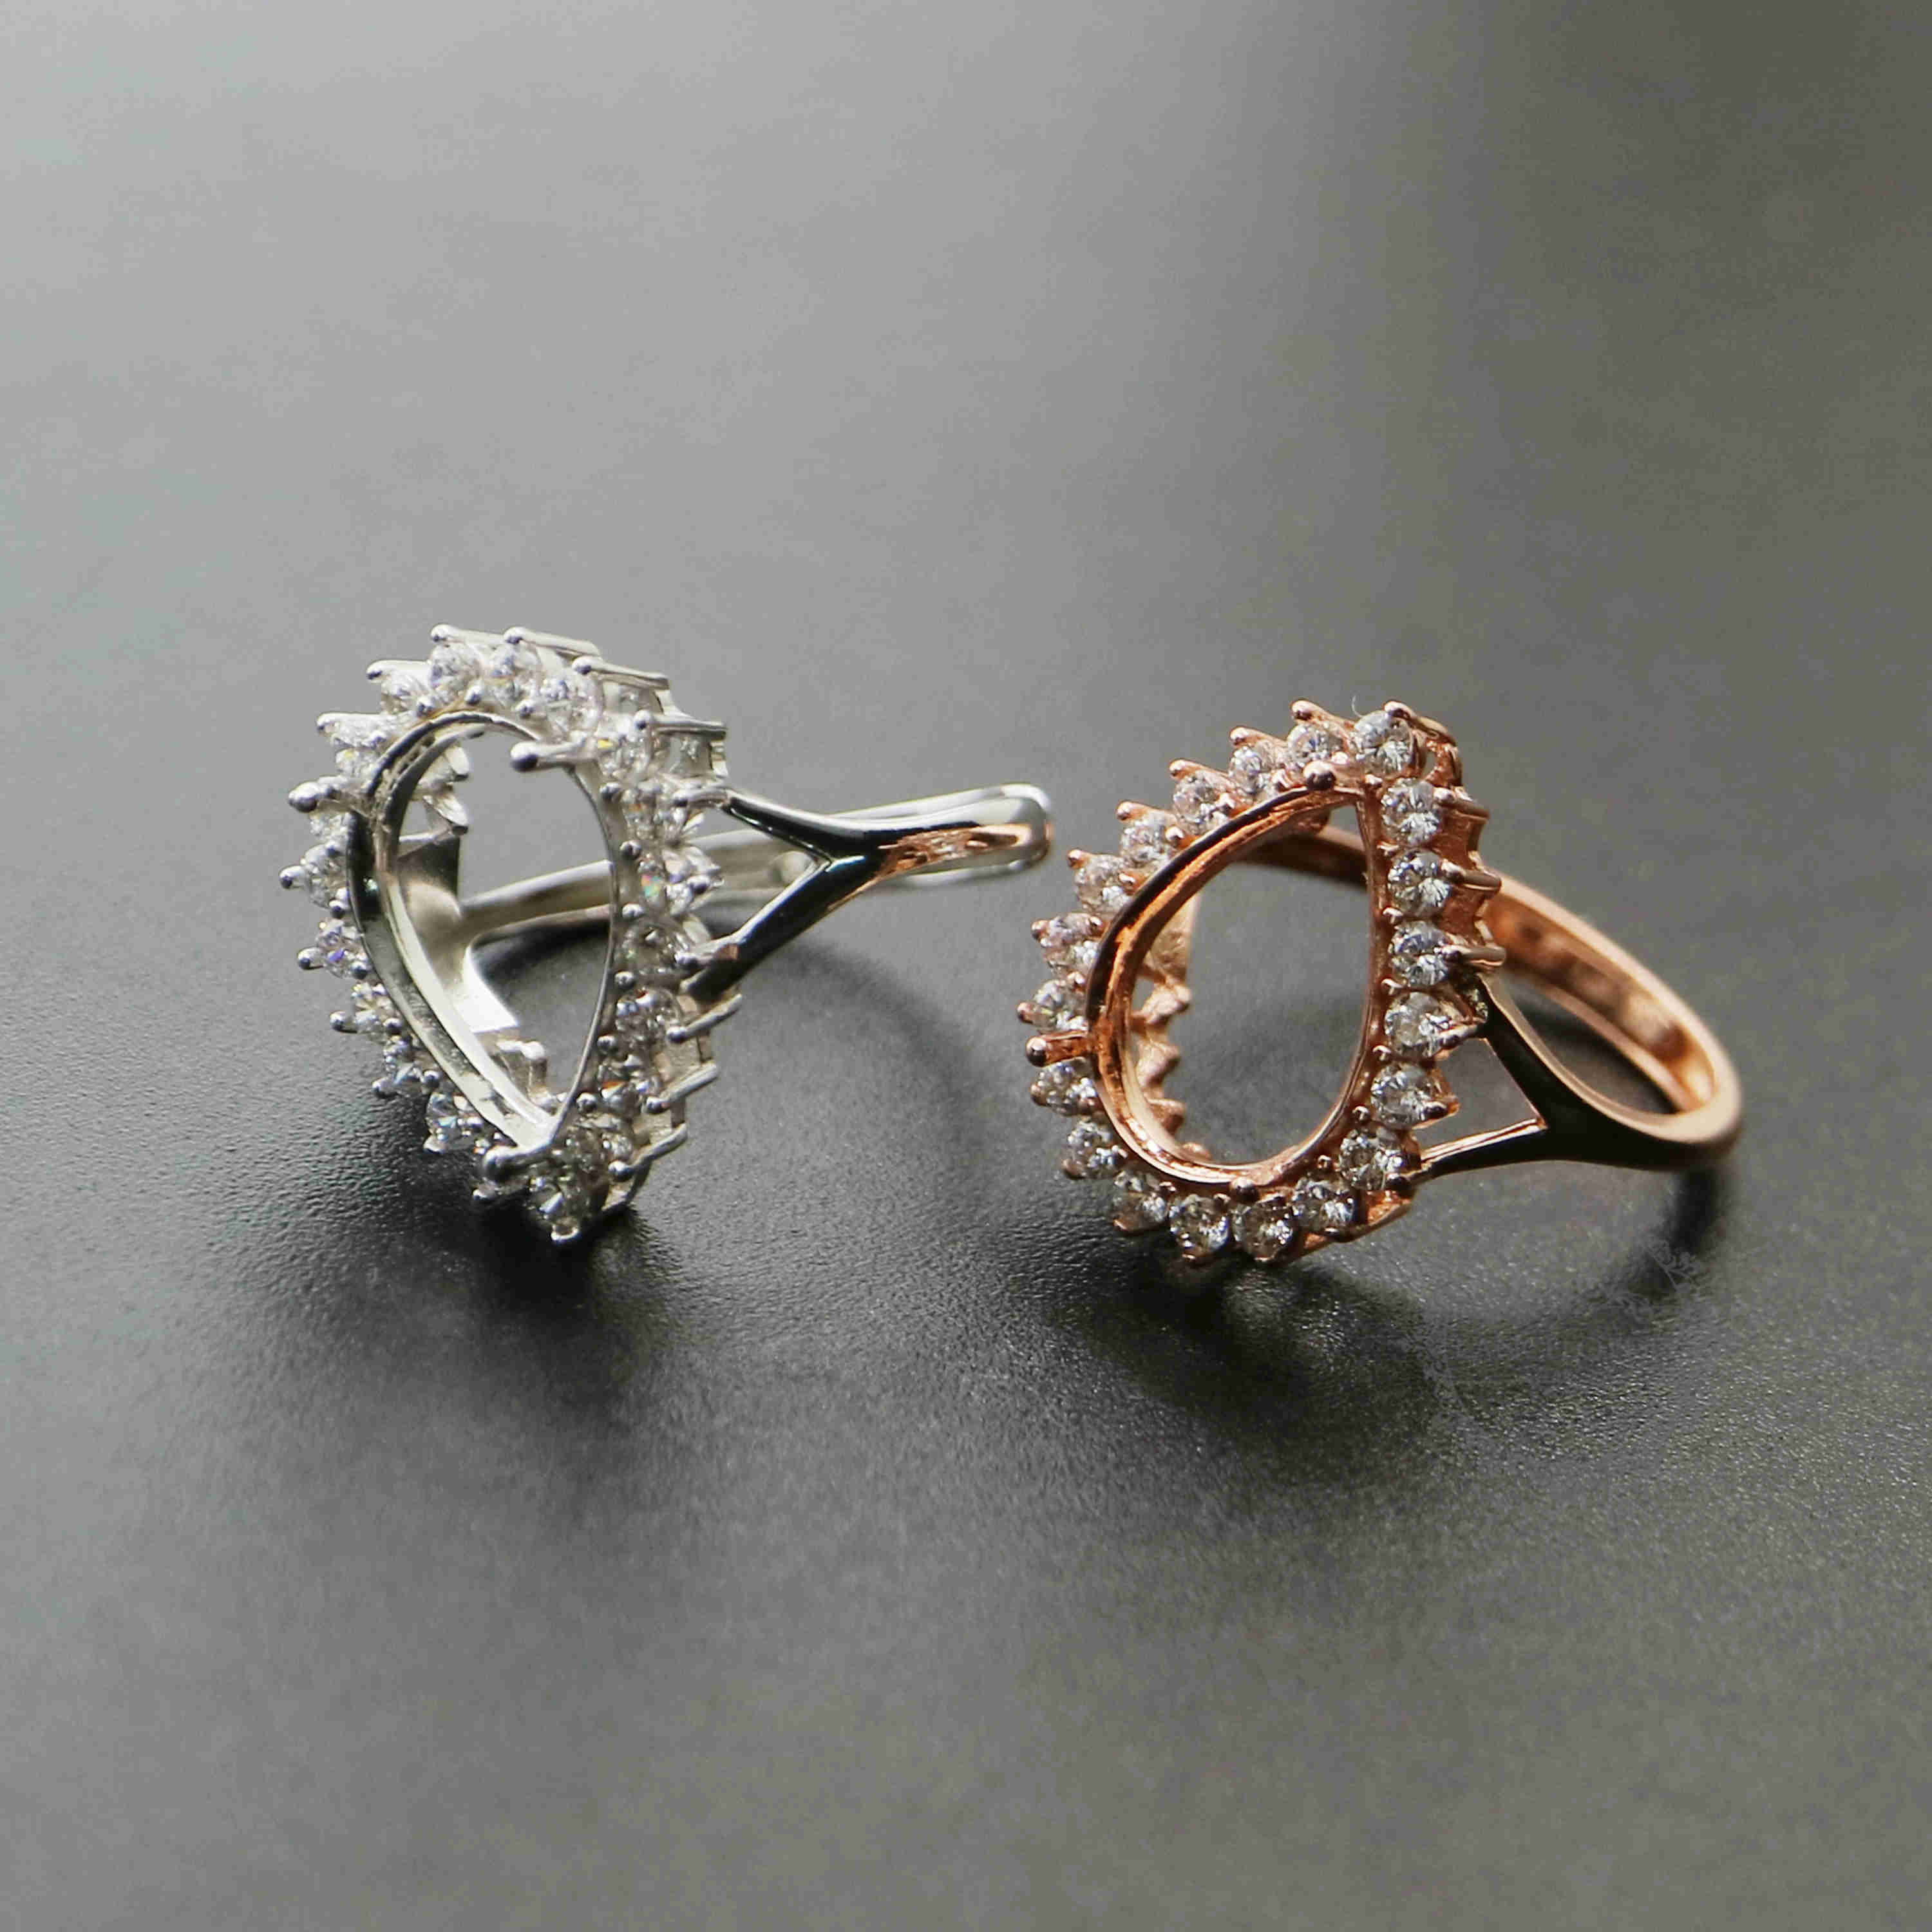 1Pcs Rose Gold Silver Tear Pear Drop Gems Cz Stone Prong Setting 925 Sterling Silver Bezel Tray DIY Adjustable Ring Settings 1294107 - Click Image to Close